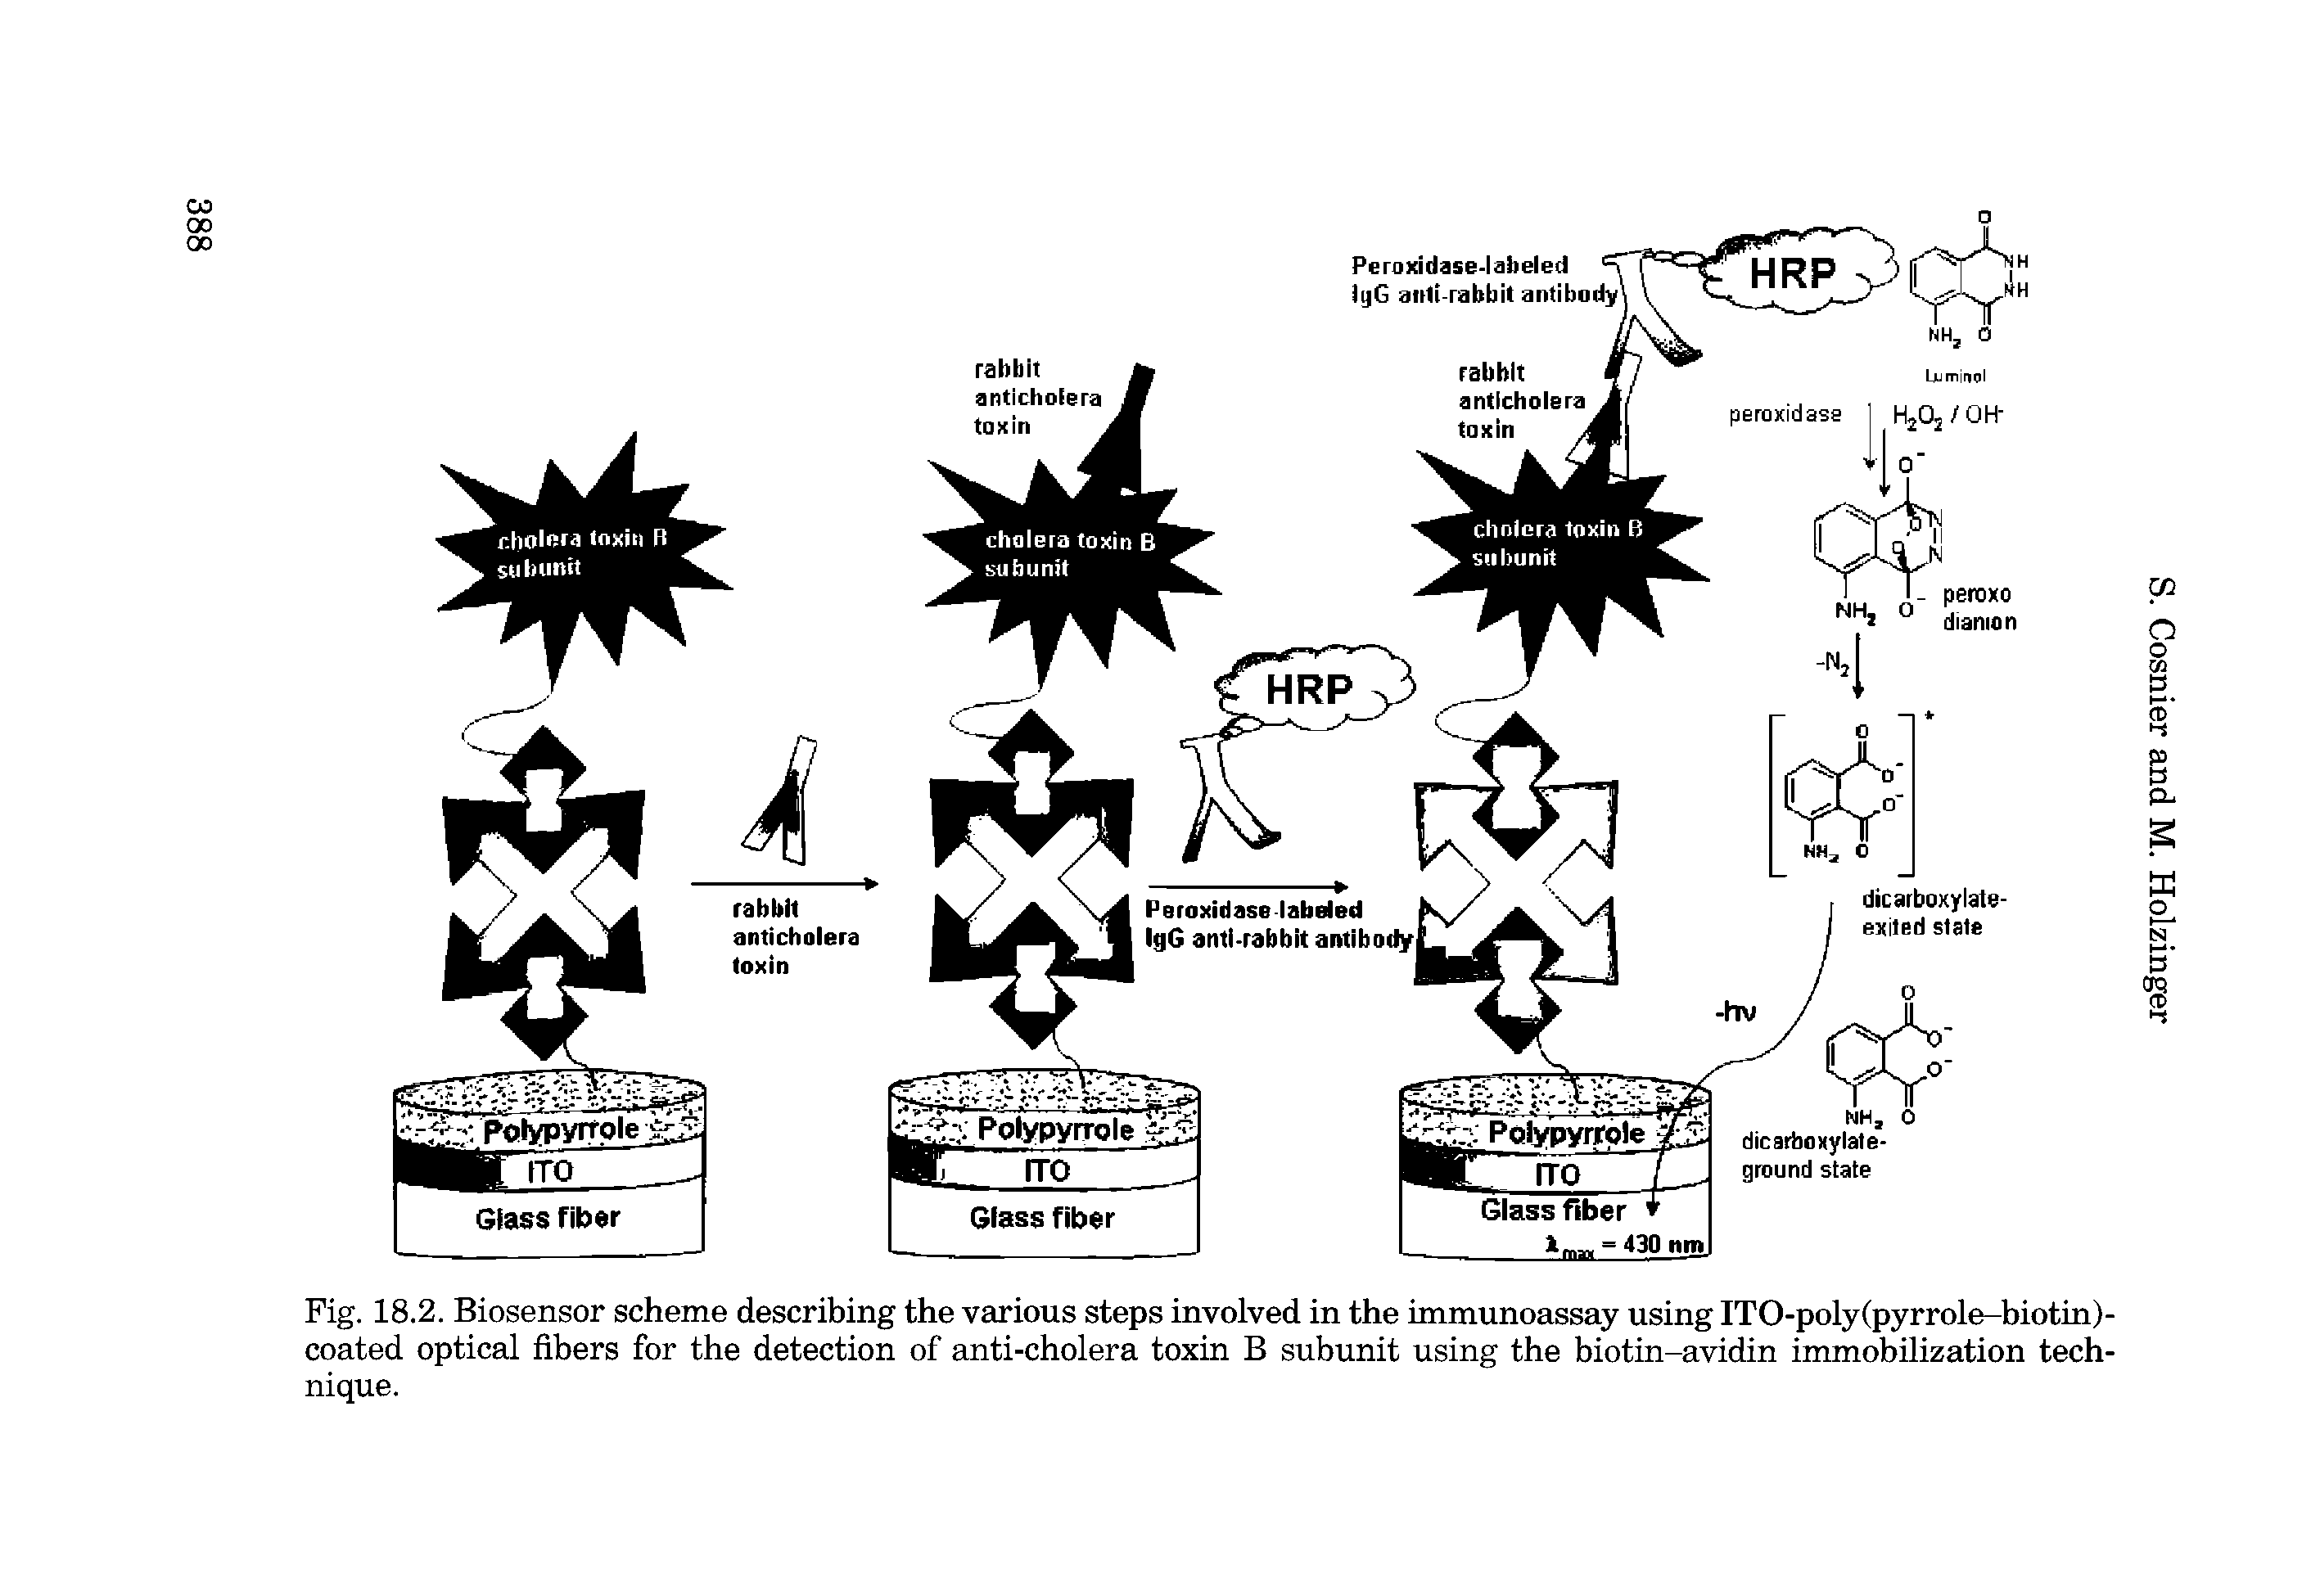 Fig. 18.2. Biosensor scheme describing the various steps involved in the immunoassay using ITO-poly(pyrrole-biotin)-coated optical fibers for the detection of anti-cholera toxin B subunit using the biotin-avidin immobilization technique.